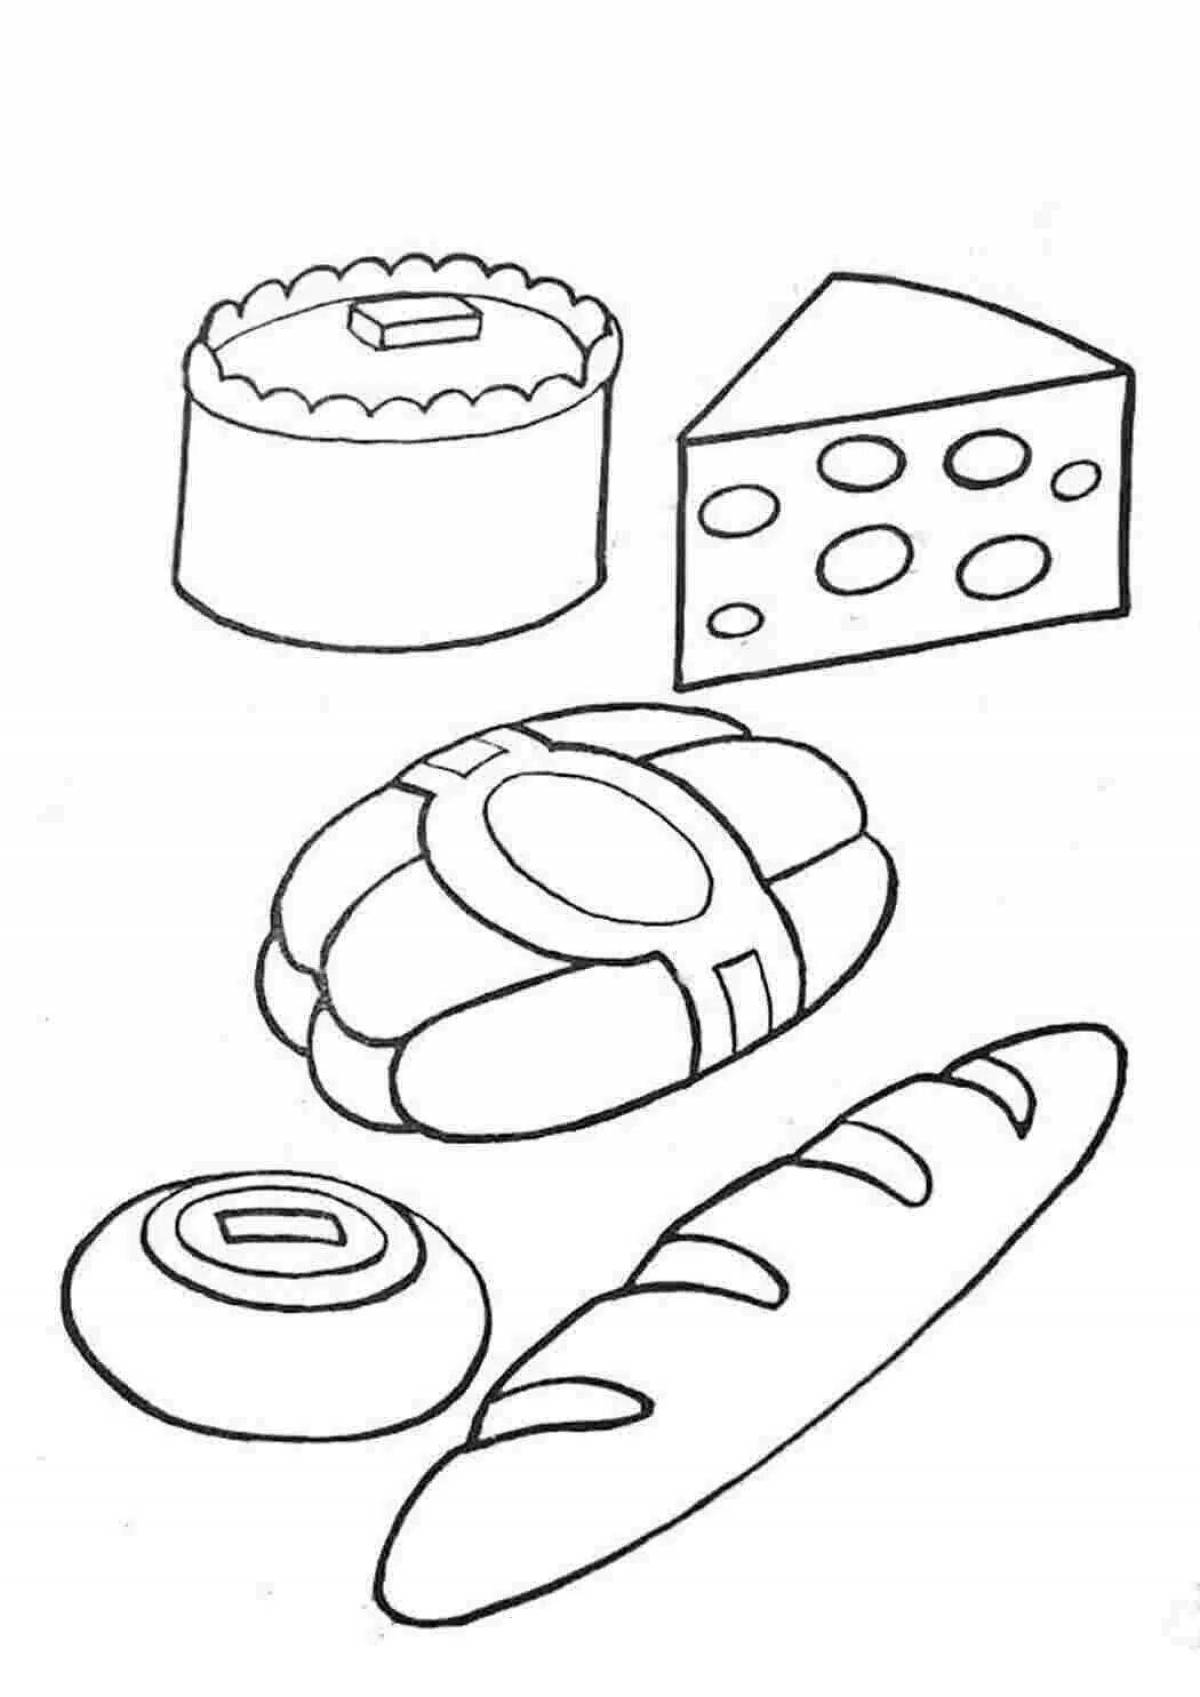 Coloring page for kids healthy food